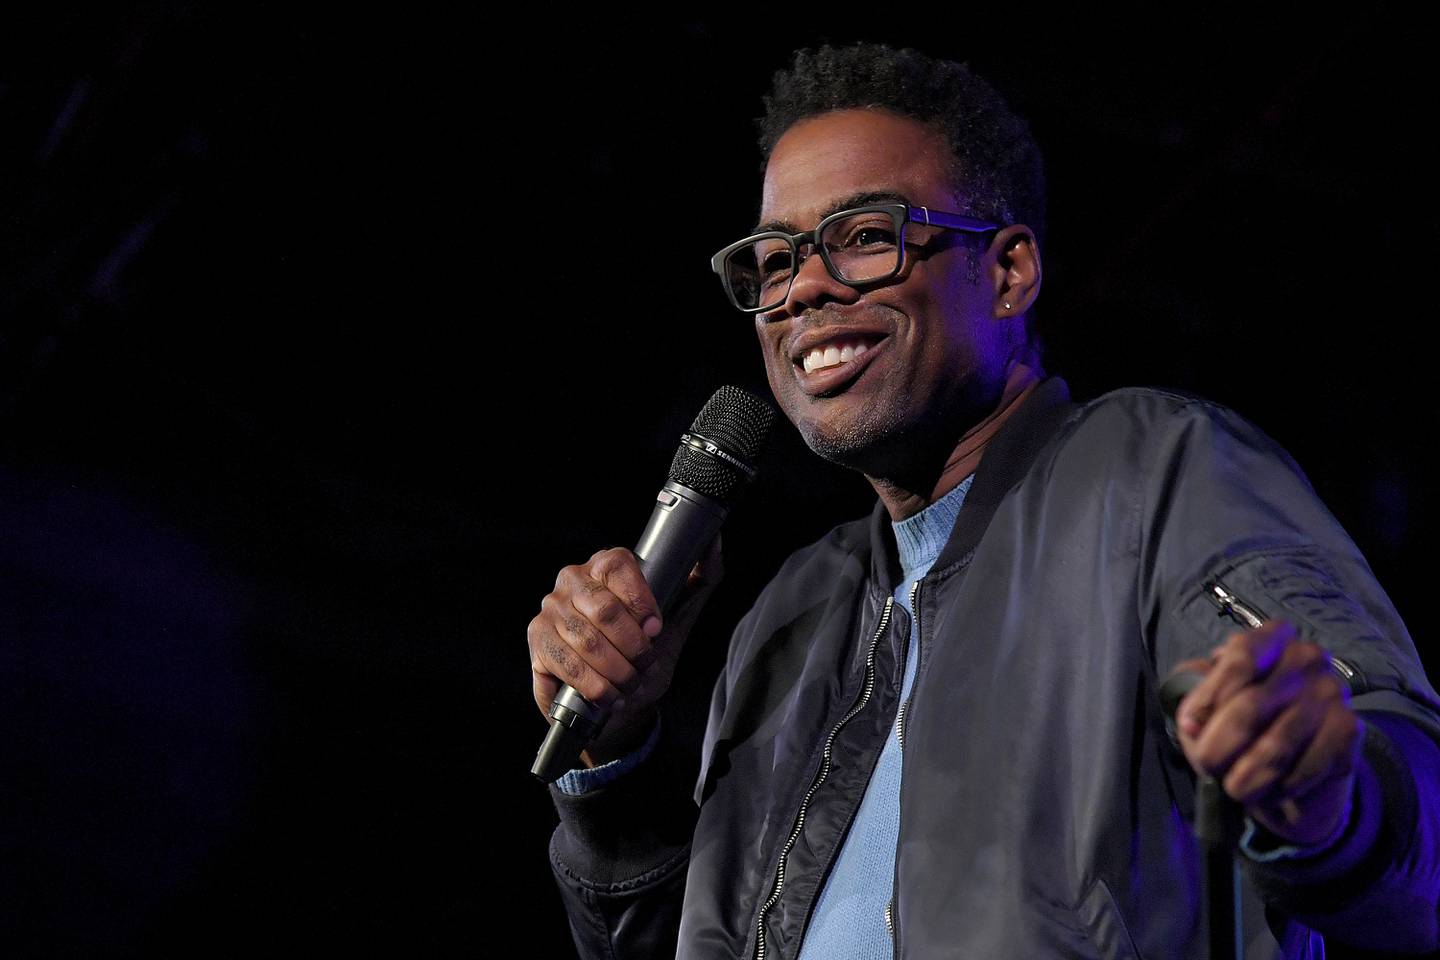 Comedian Chris Rock holds a microphone while performing. He's wearing glasses, a dark jacket and blue shirt.